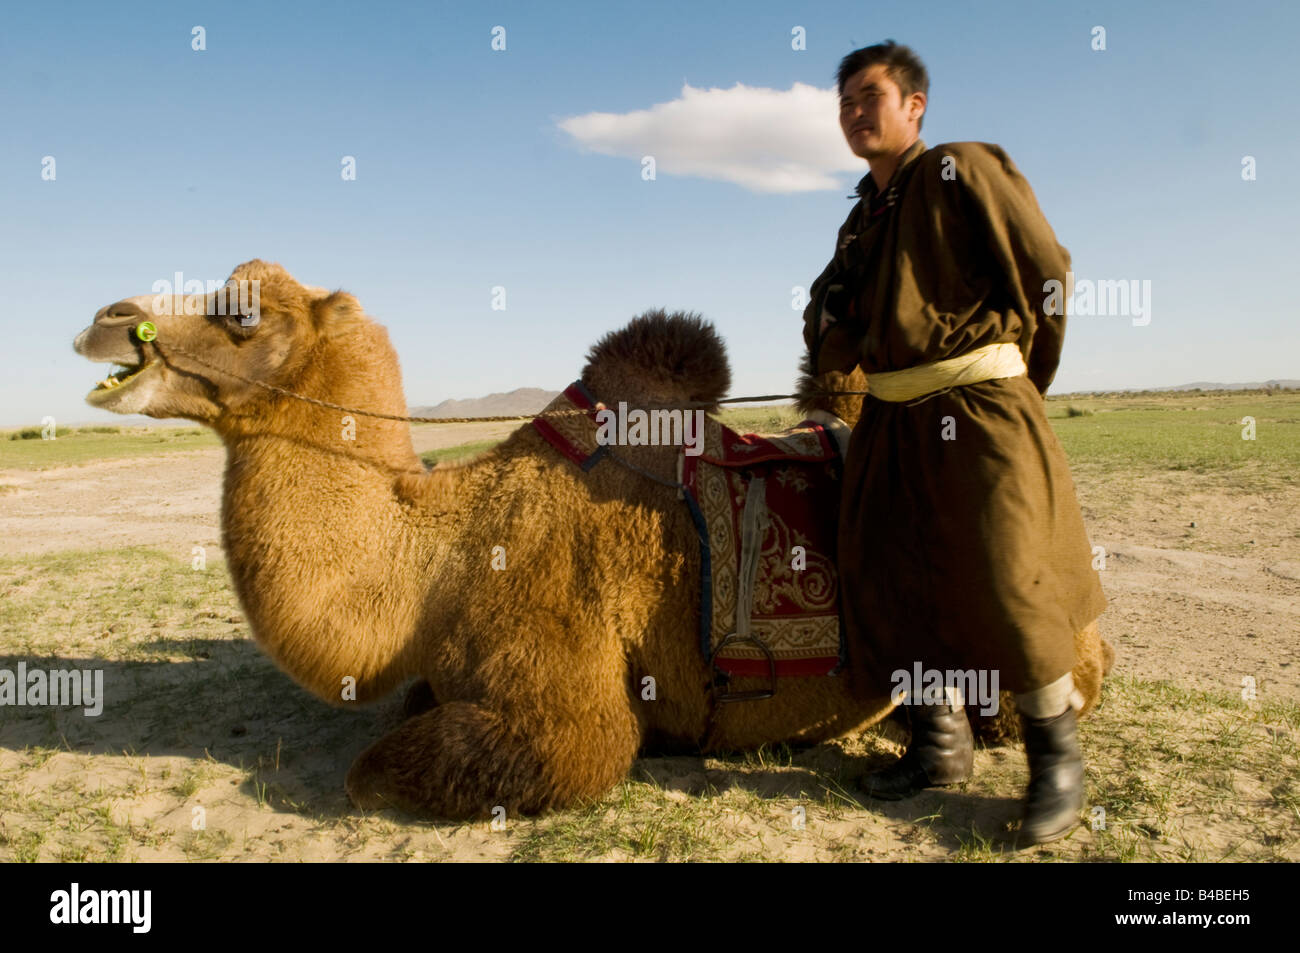 A Mongol man and his Bactrian camel. Stock Photo